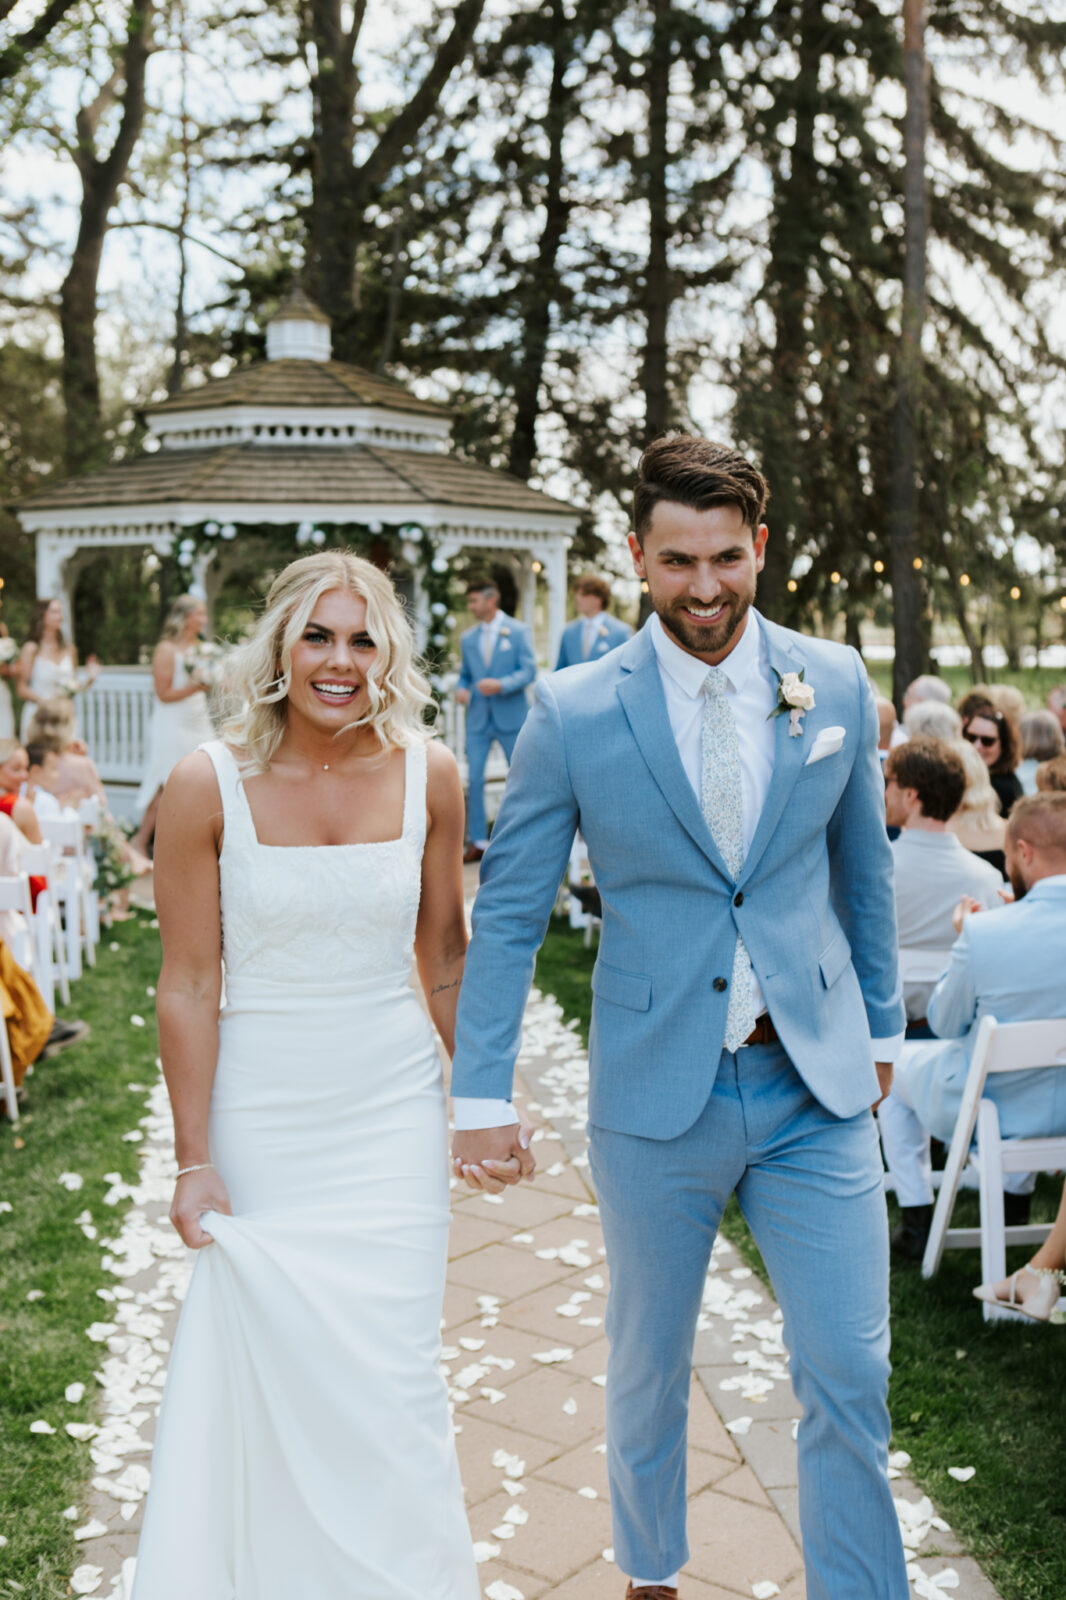 baby blue wedding, vintage meets classic wedding inspiration, summer wedding inspiration